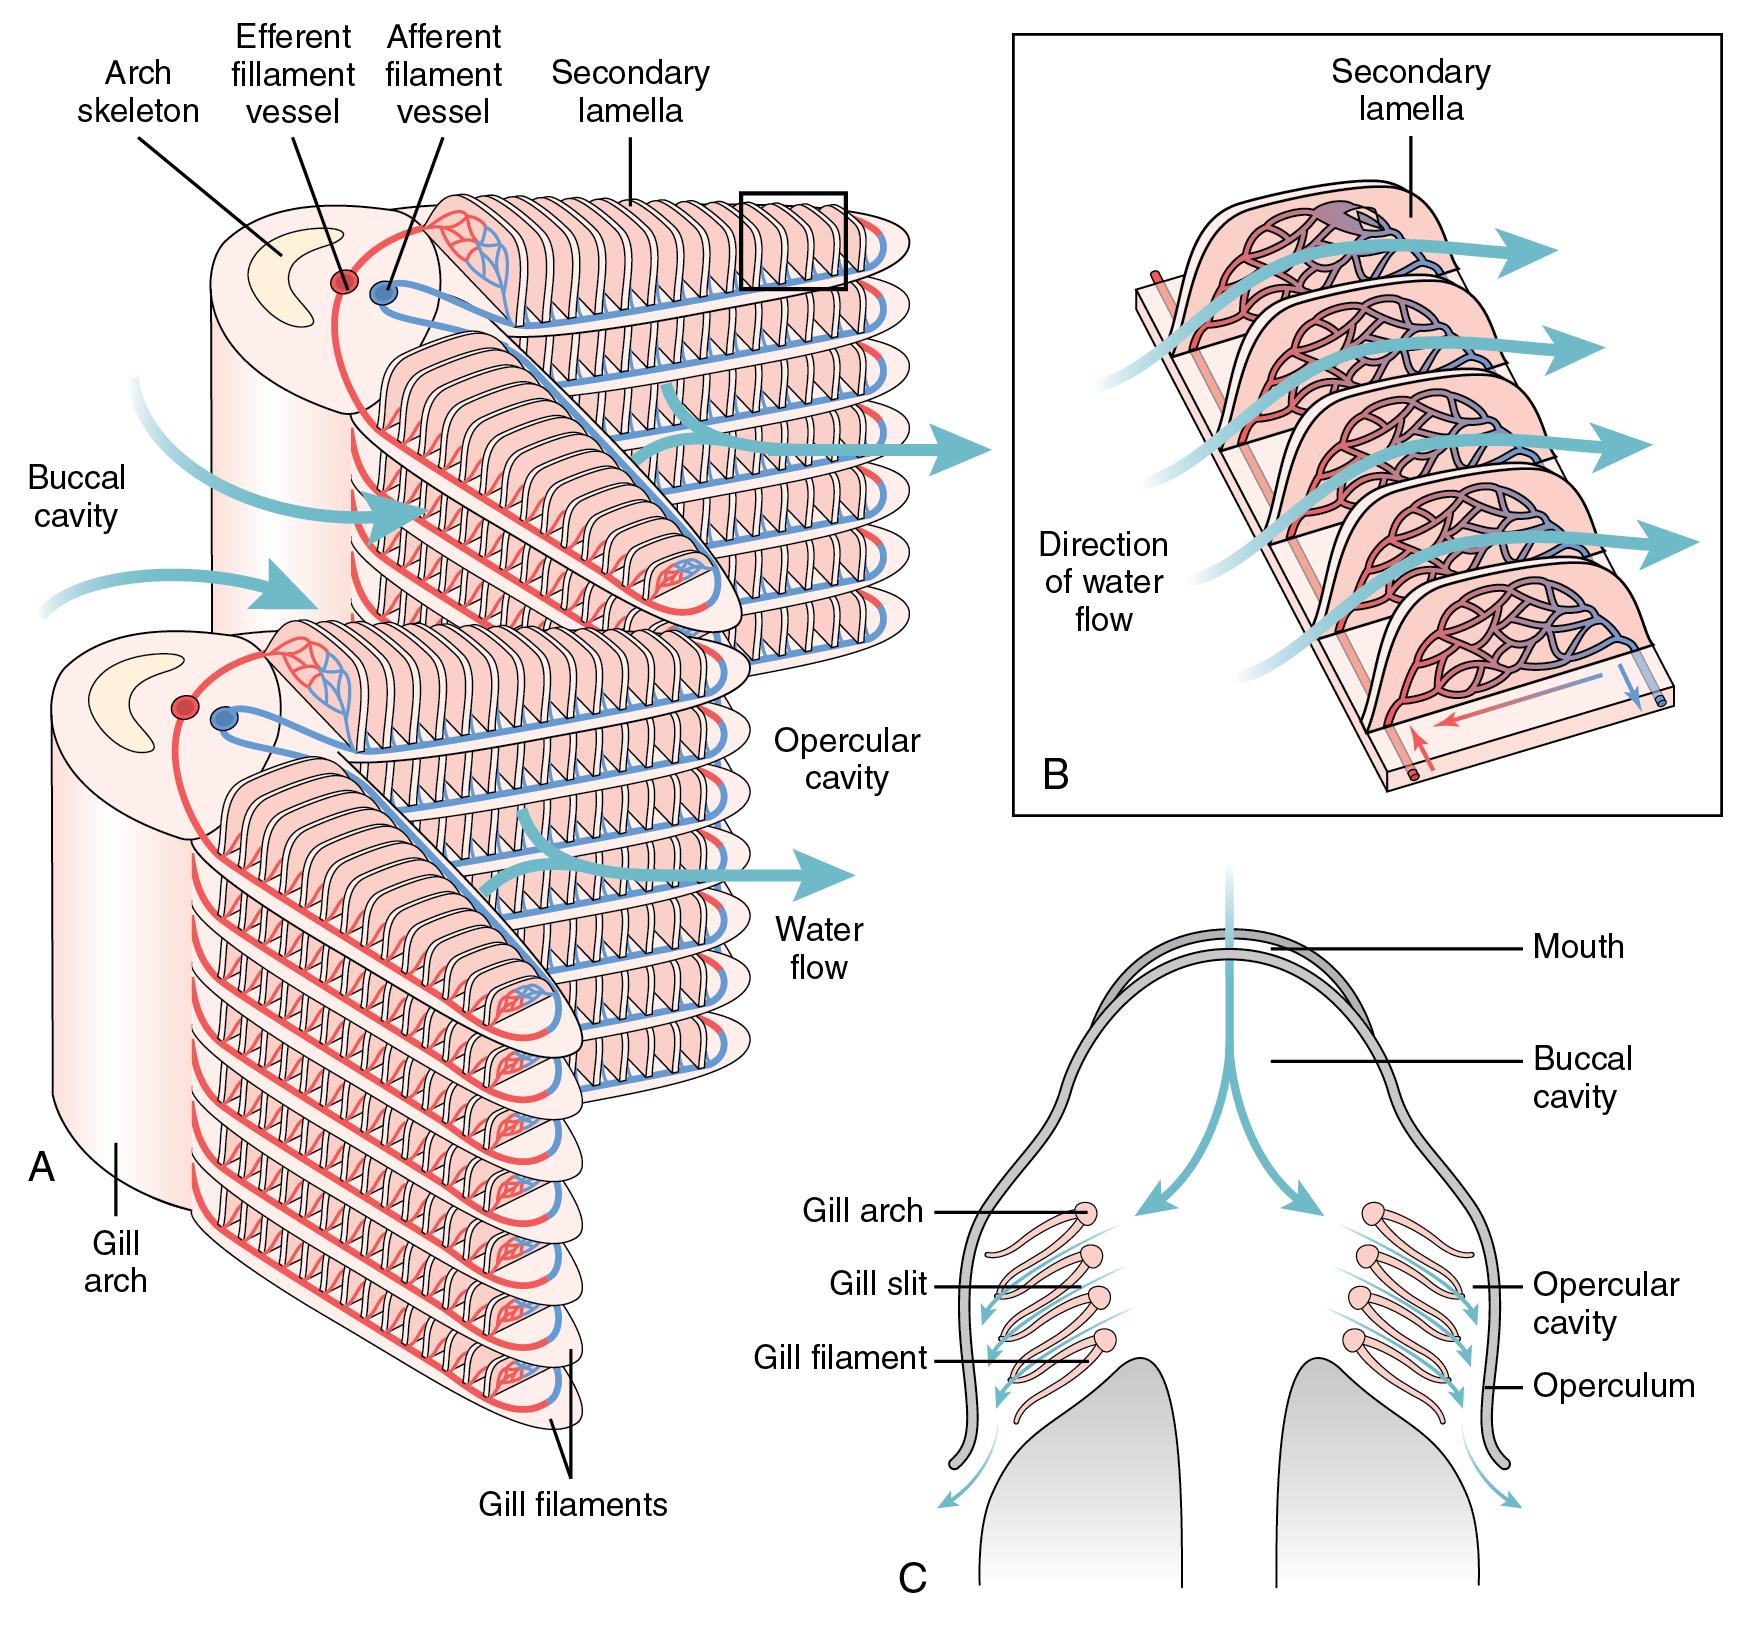 • Fig. 26.4, Structure and function of gills in bony fish. (A) Structure of the gill arch, filaments and secondary lamellae, and the direction of water flow. (B) Water flow is in the opposite direction to blood flow through the secondary lamellae, establishing an efficient countercurrent system. (C) Water flows through the buccal cavity, across the gills and out through the opercular cavity, with muscular control of the openings to the cavities used to pump water through the gills when required.